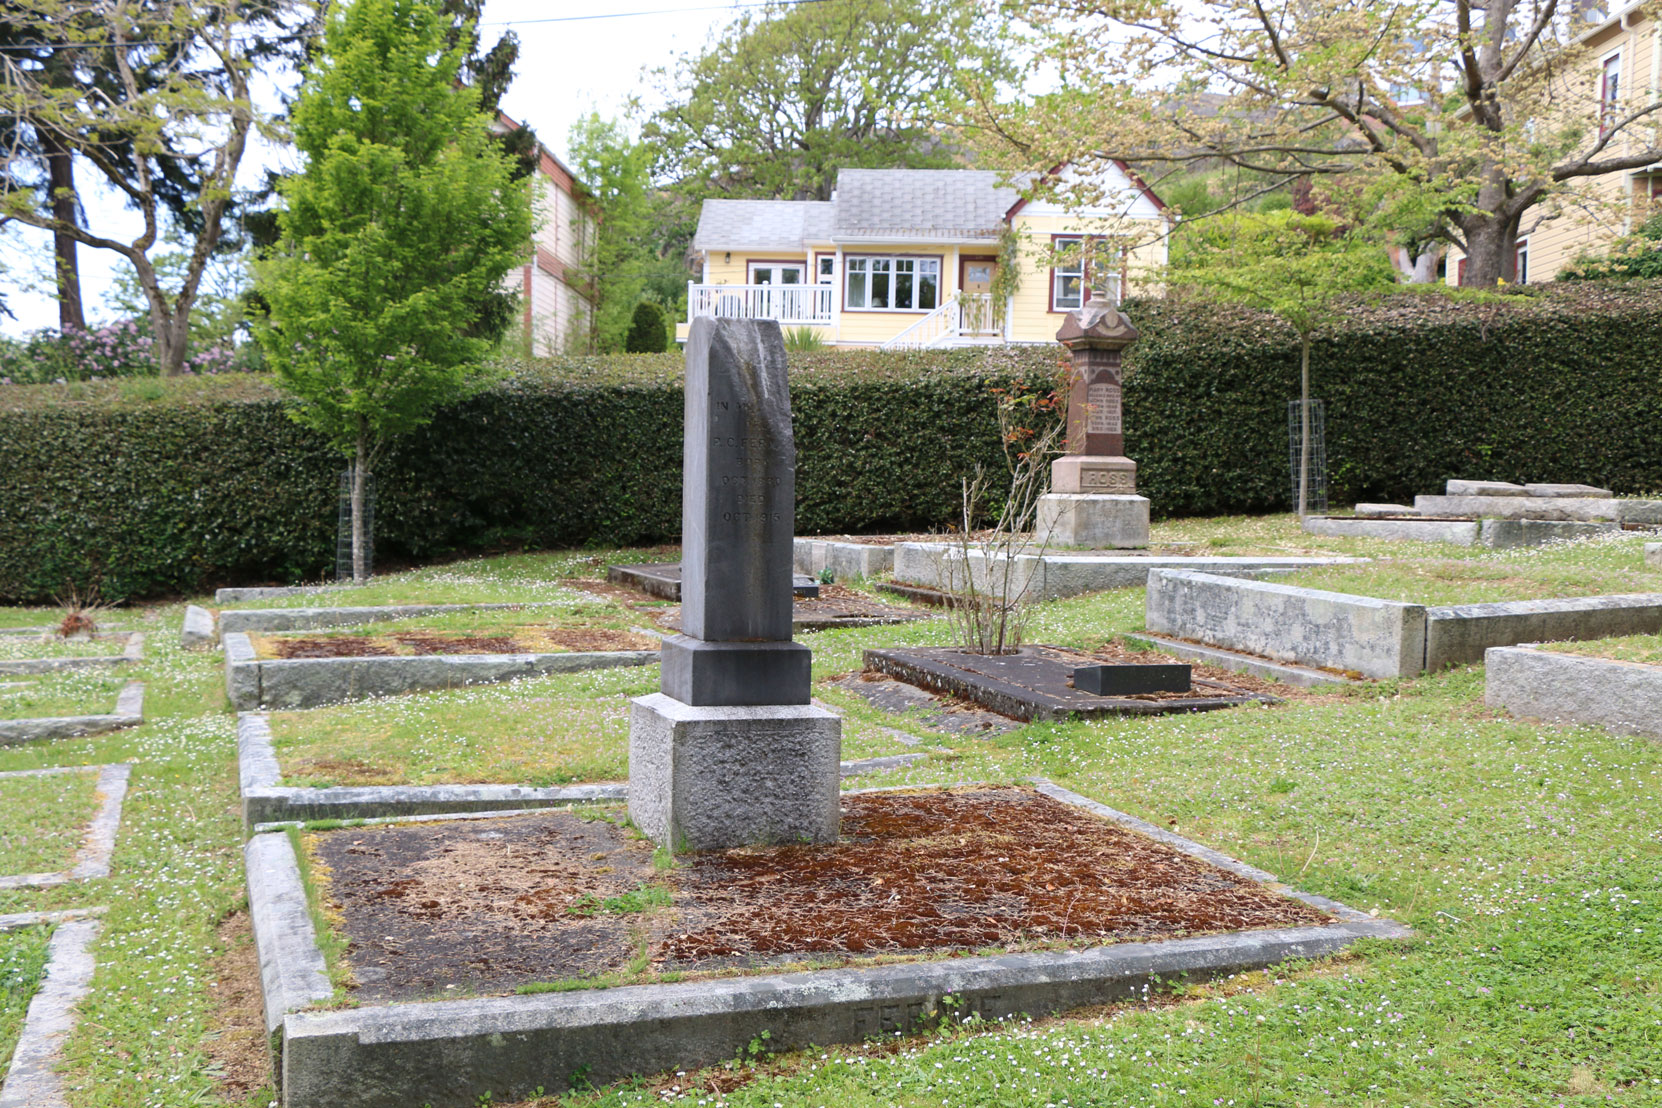 Grave of Peter Fernie & William Fernie, Ross Bay Cemetery, Victoria, B.C. (photo by Mark Anderson)